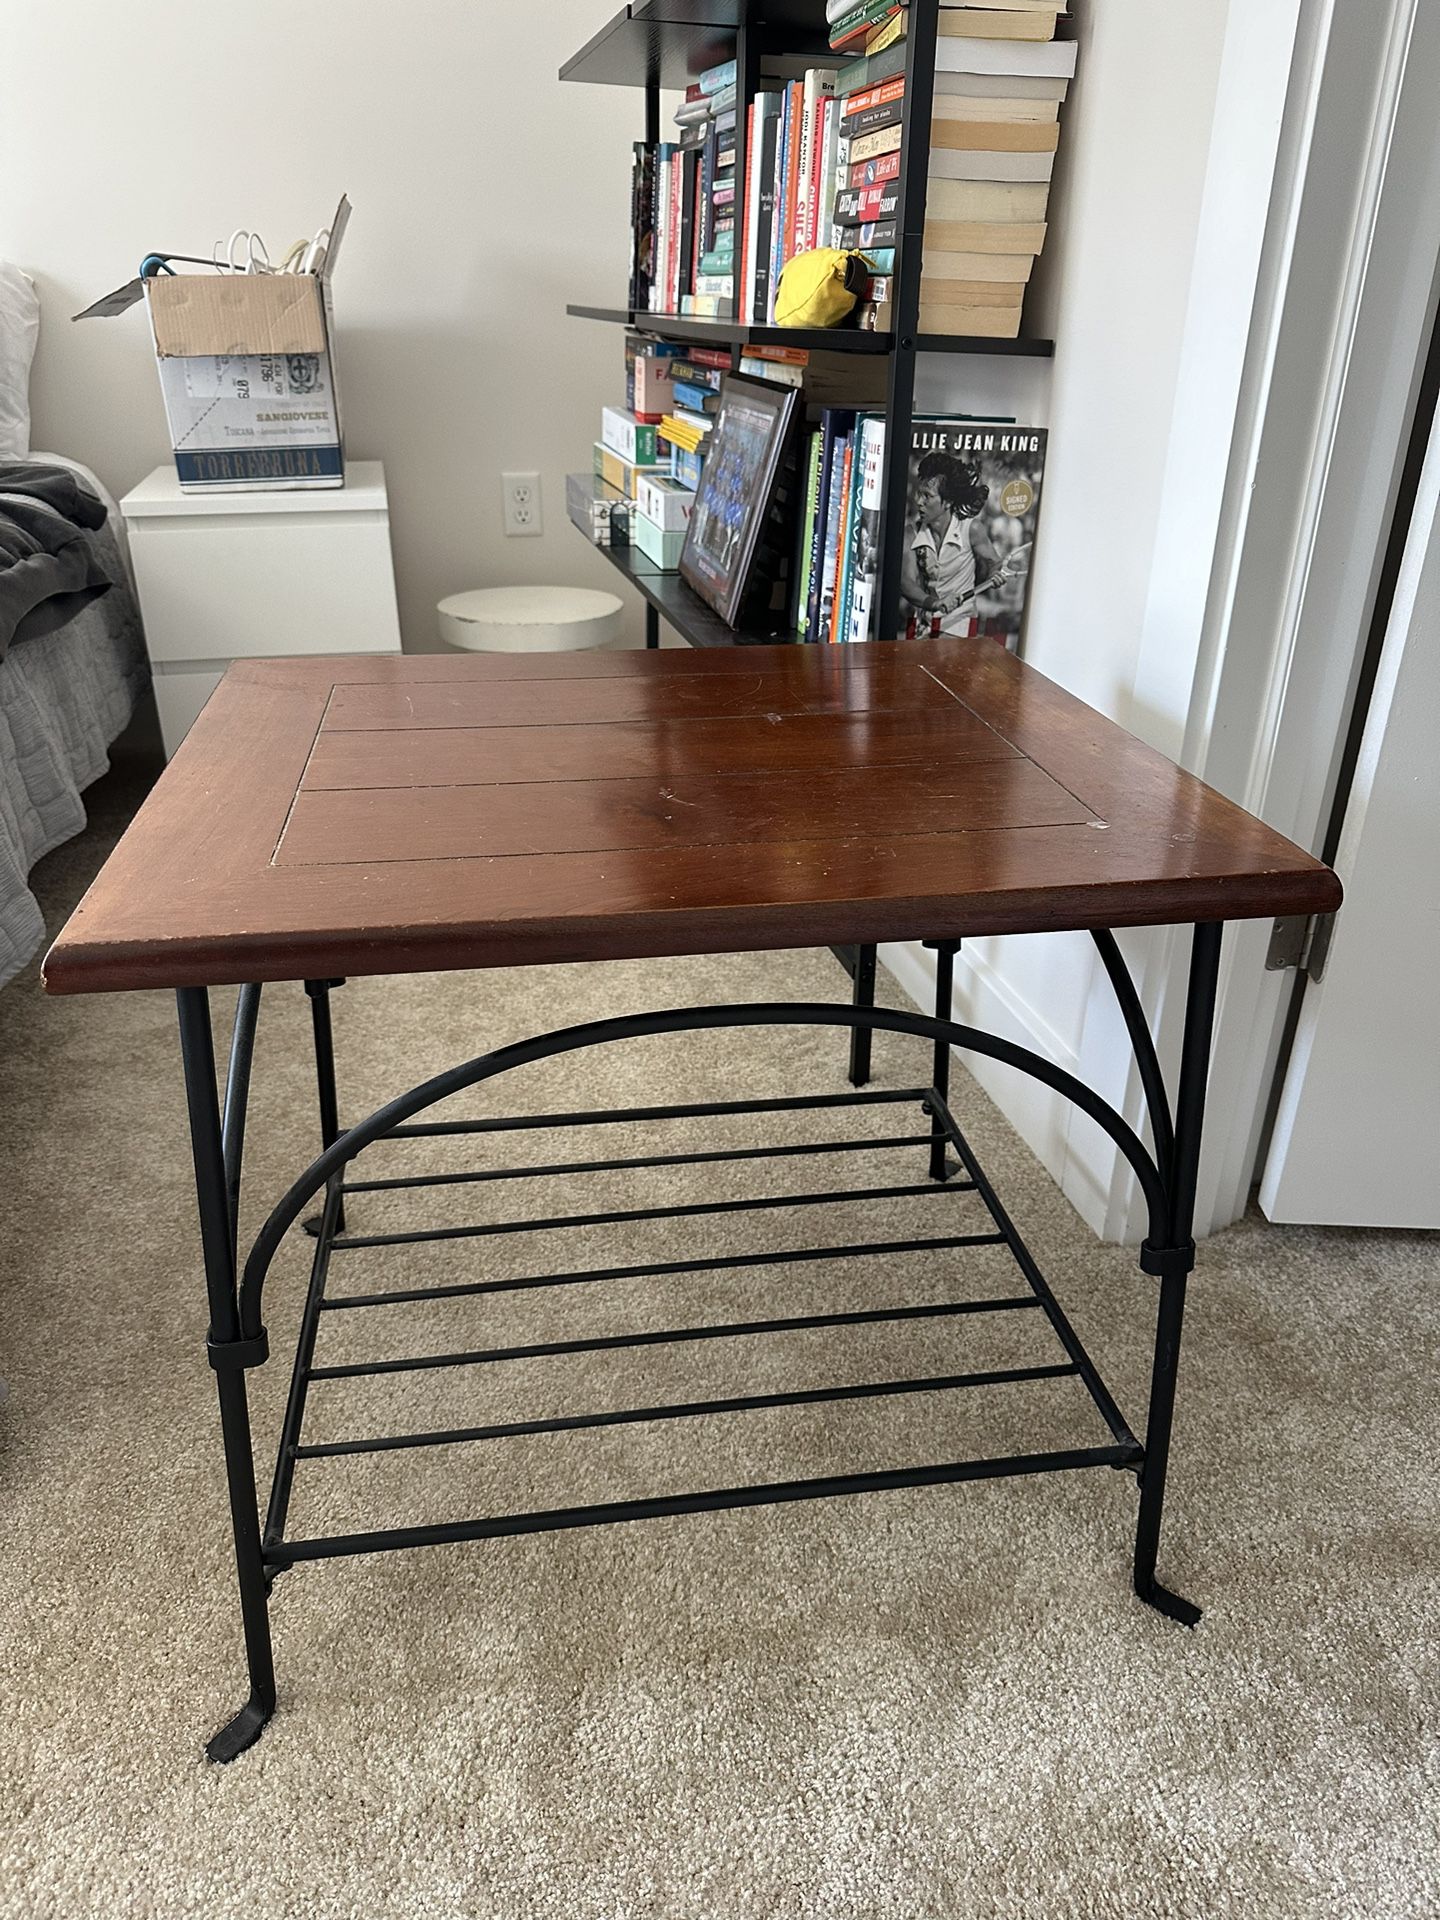 Free Side Table - Solid!